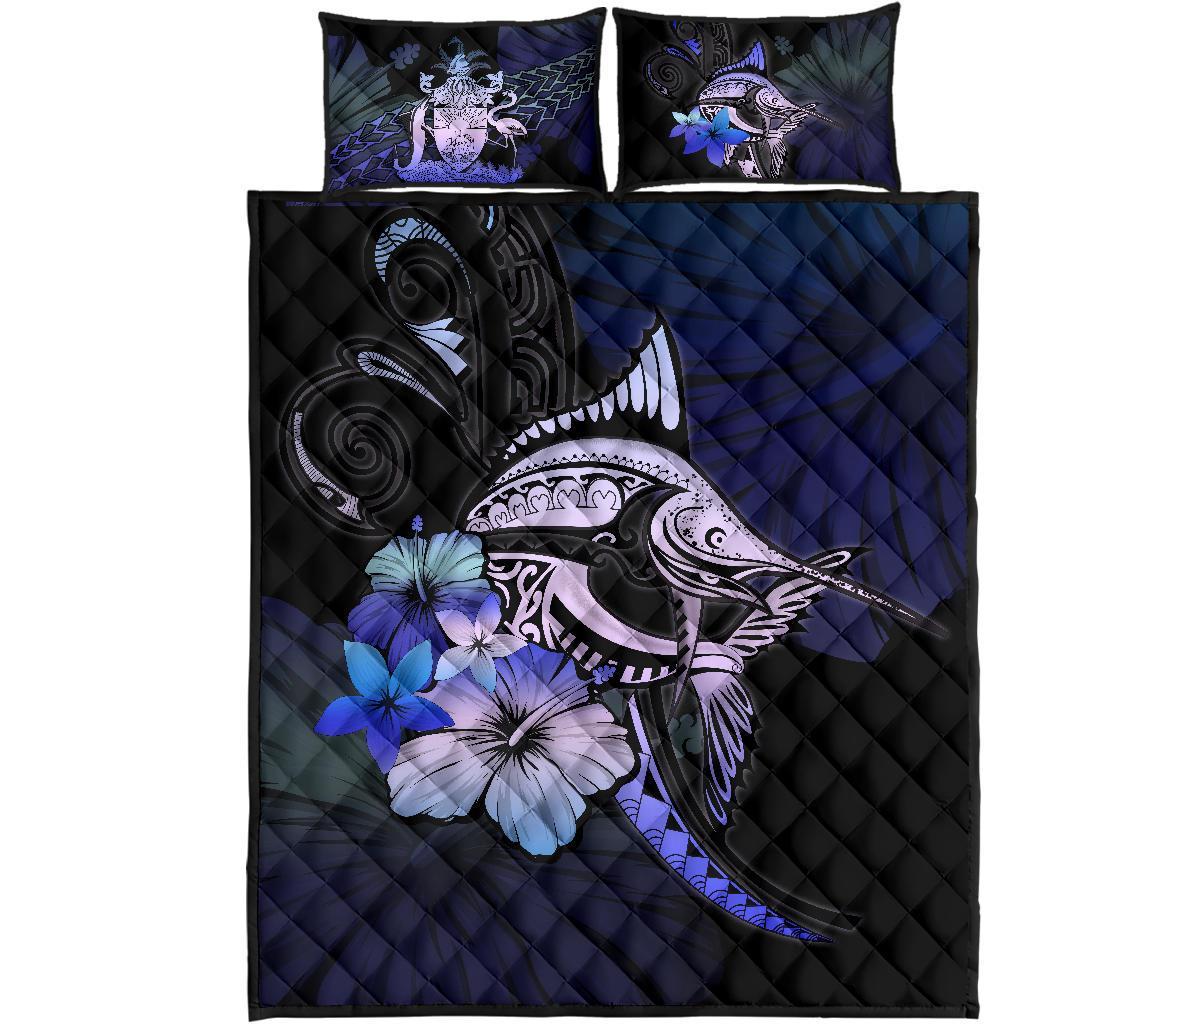 the-bahamas-quilt-bed-set-purple-blue-marlin-and-hibiscus